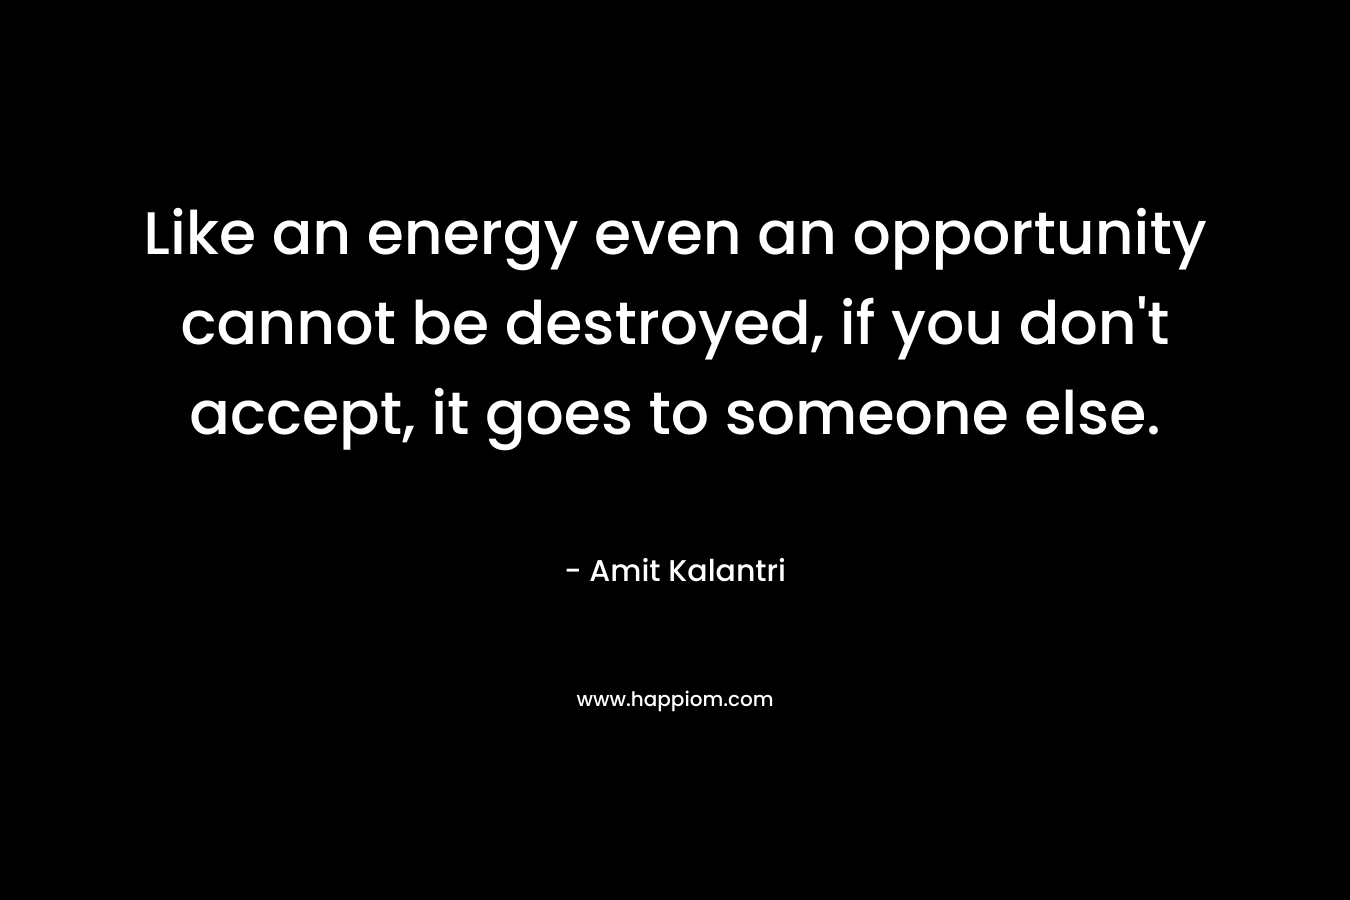 Like an energy even an opportunity cannot be destroyed, if you don't accept, it goes to someone else.